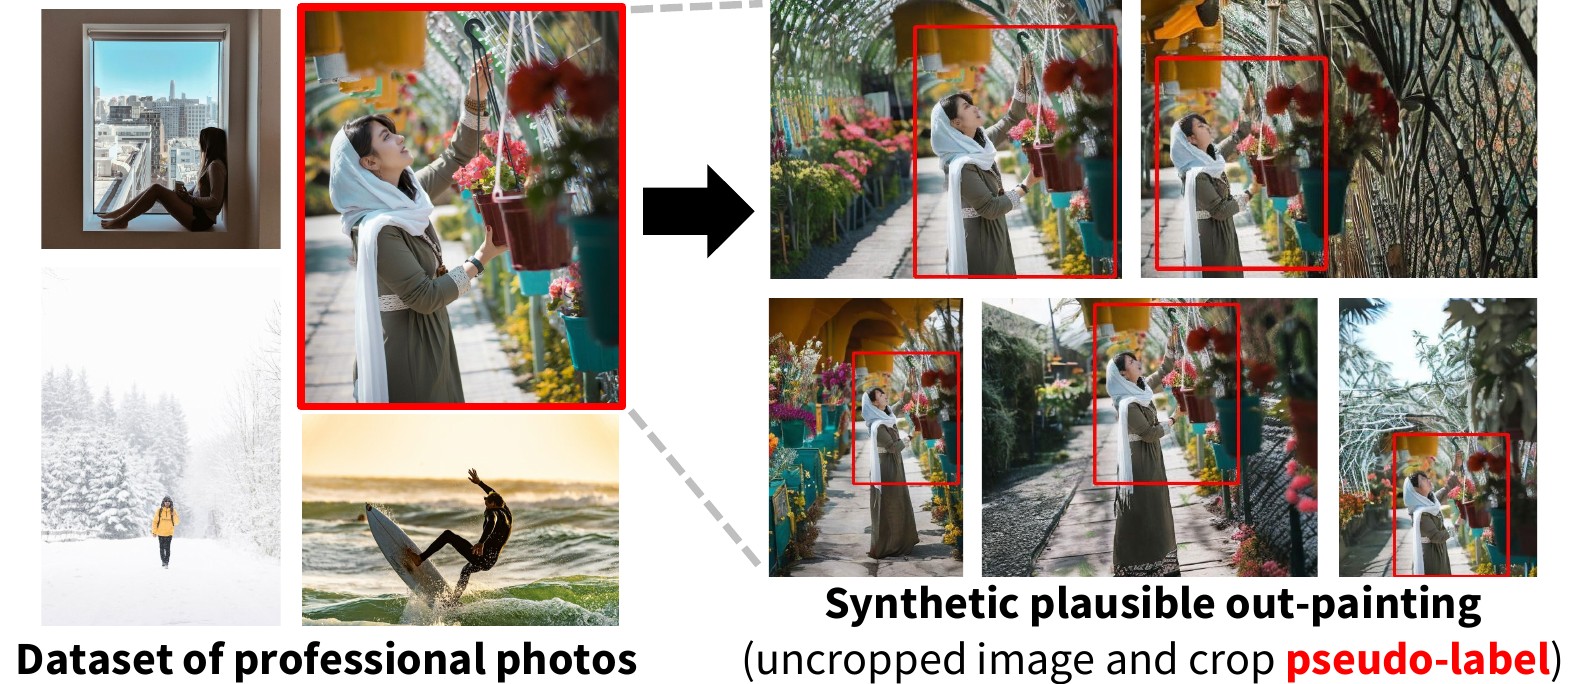 Generated training data for cropping using image outpainting